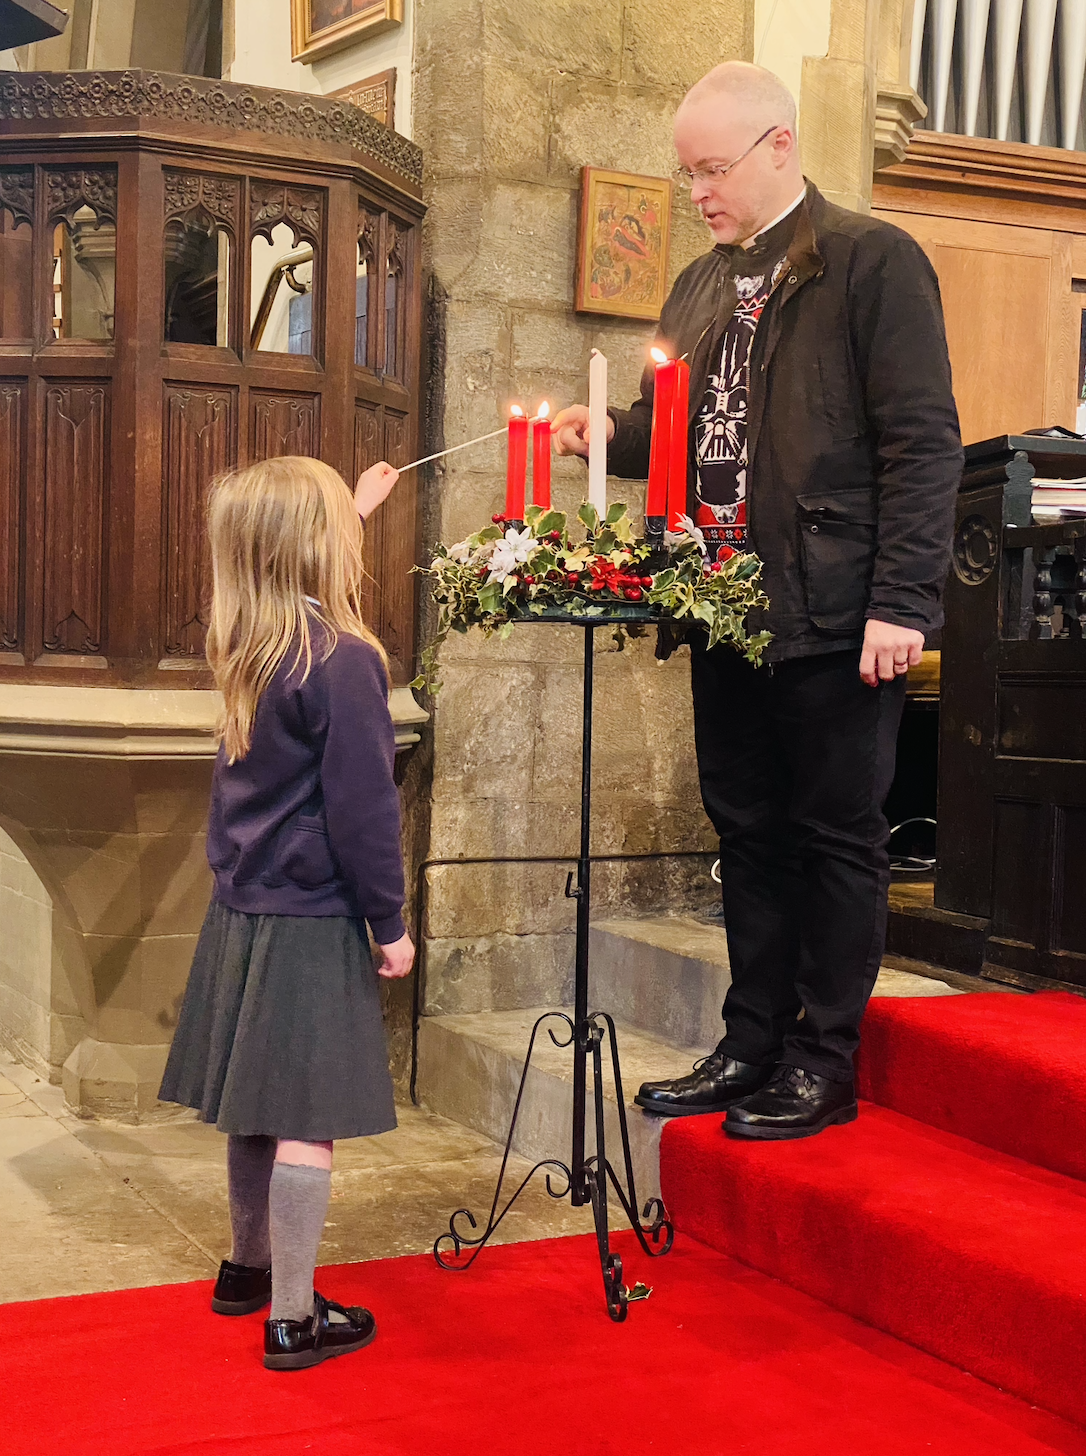 A child helping Rev. Paul light the candles